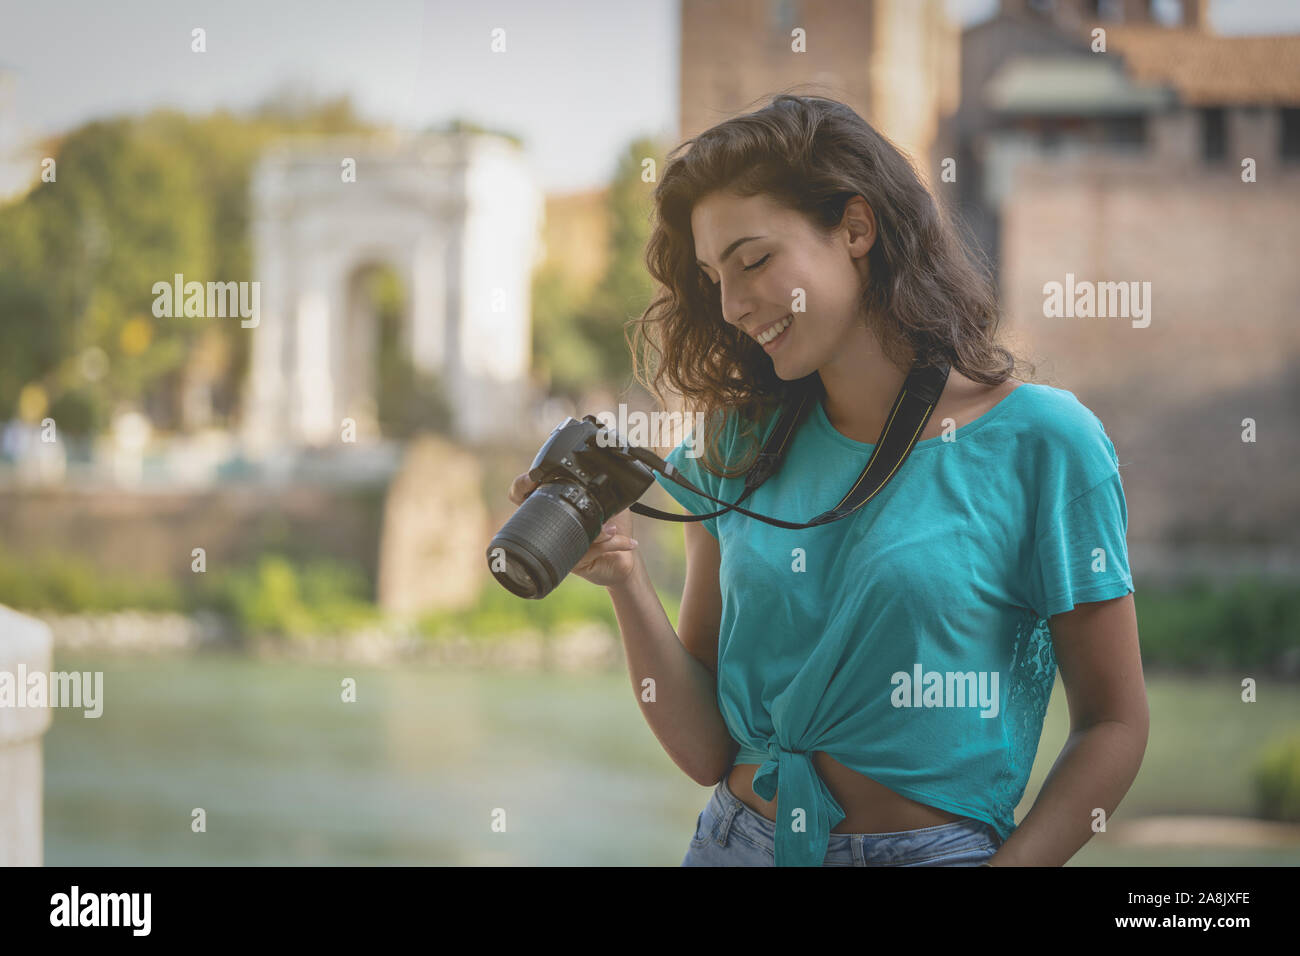 Smiling girl in an Italian city looking at the screen of a camera.  Stock Photo